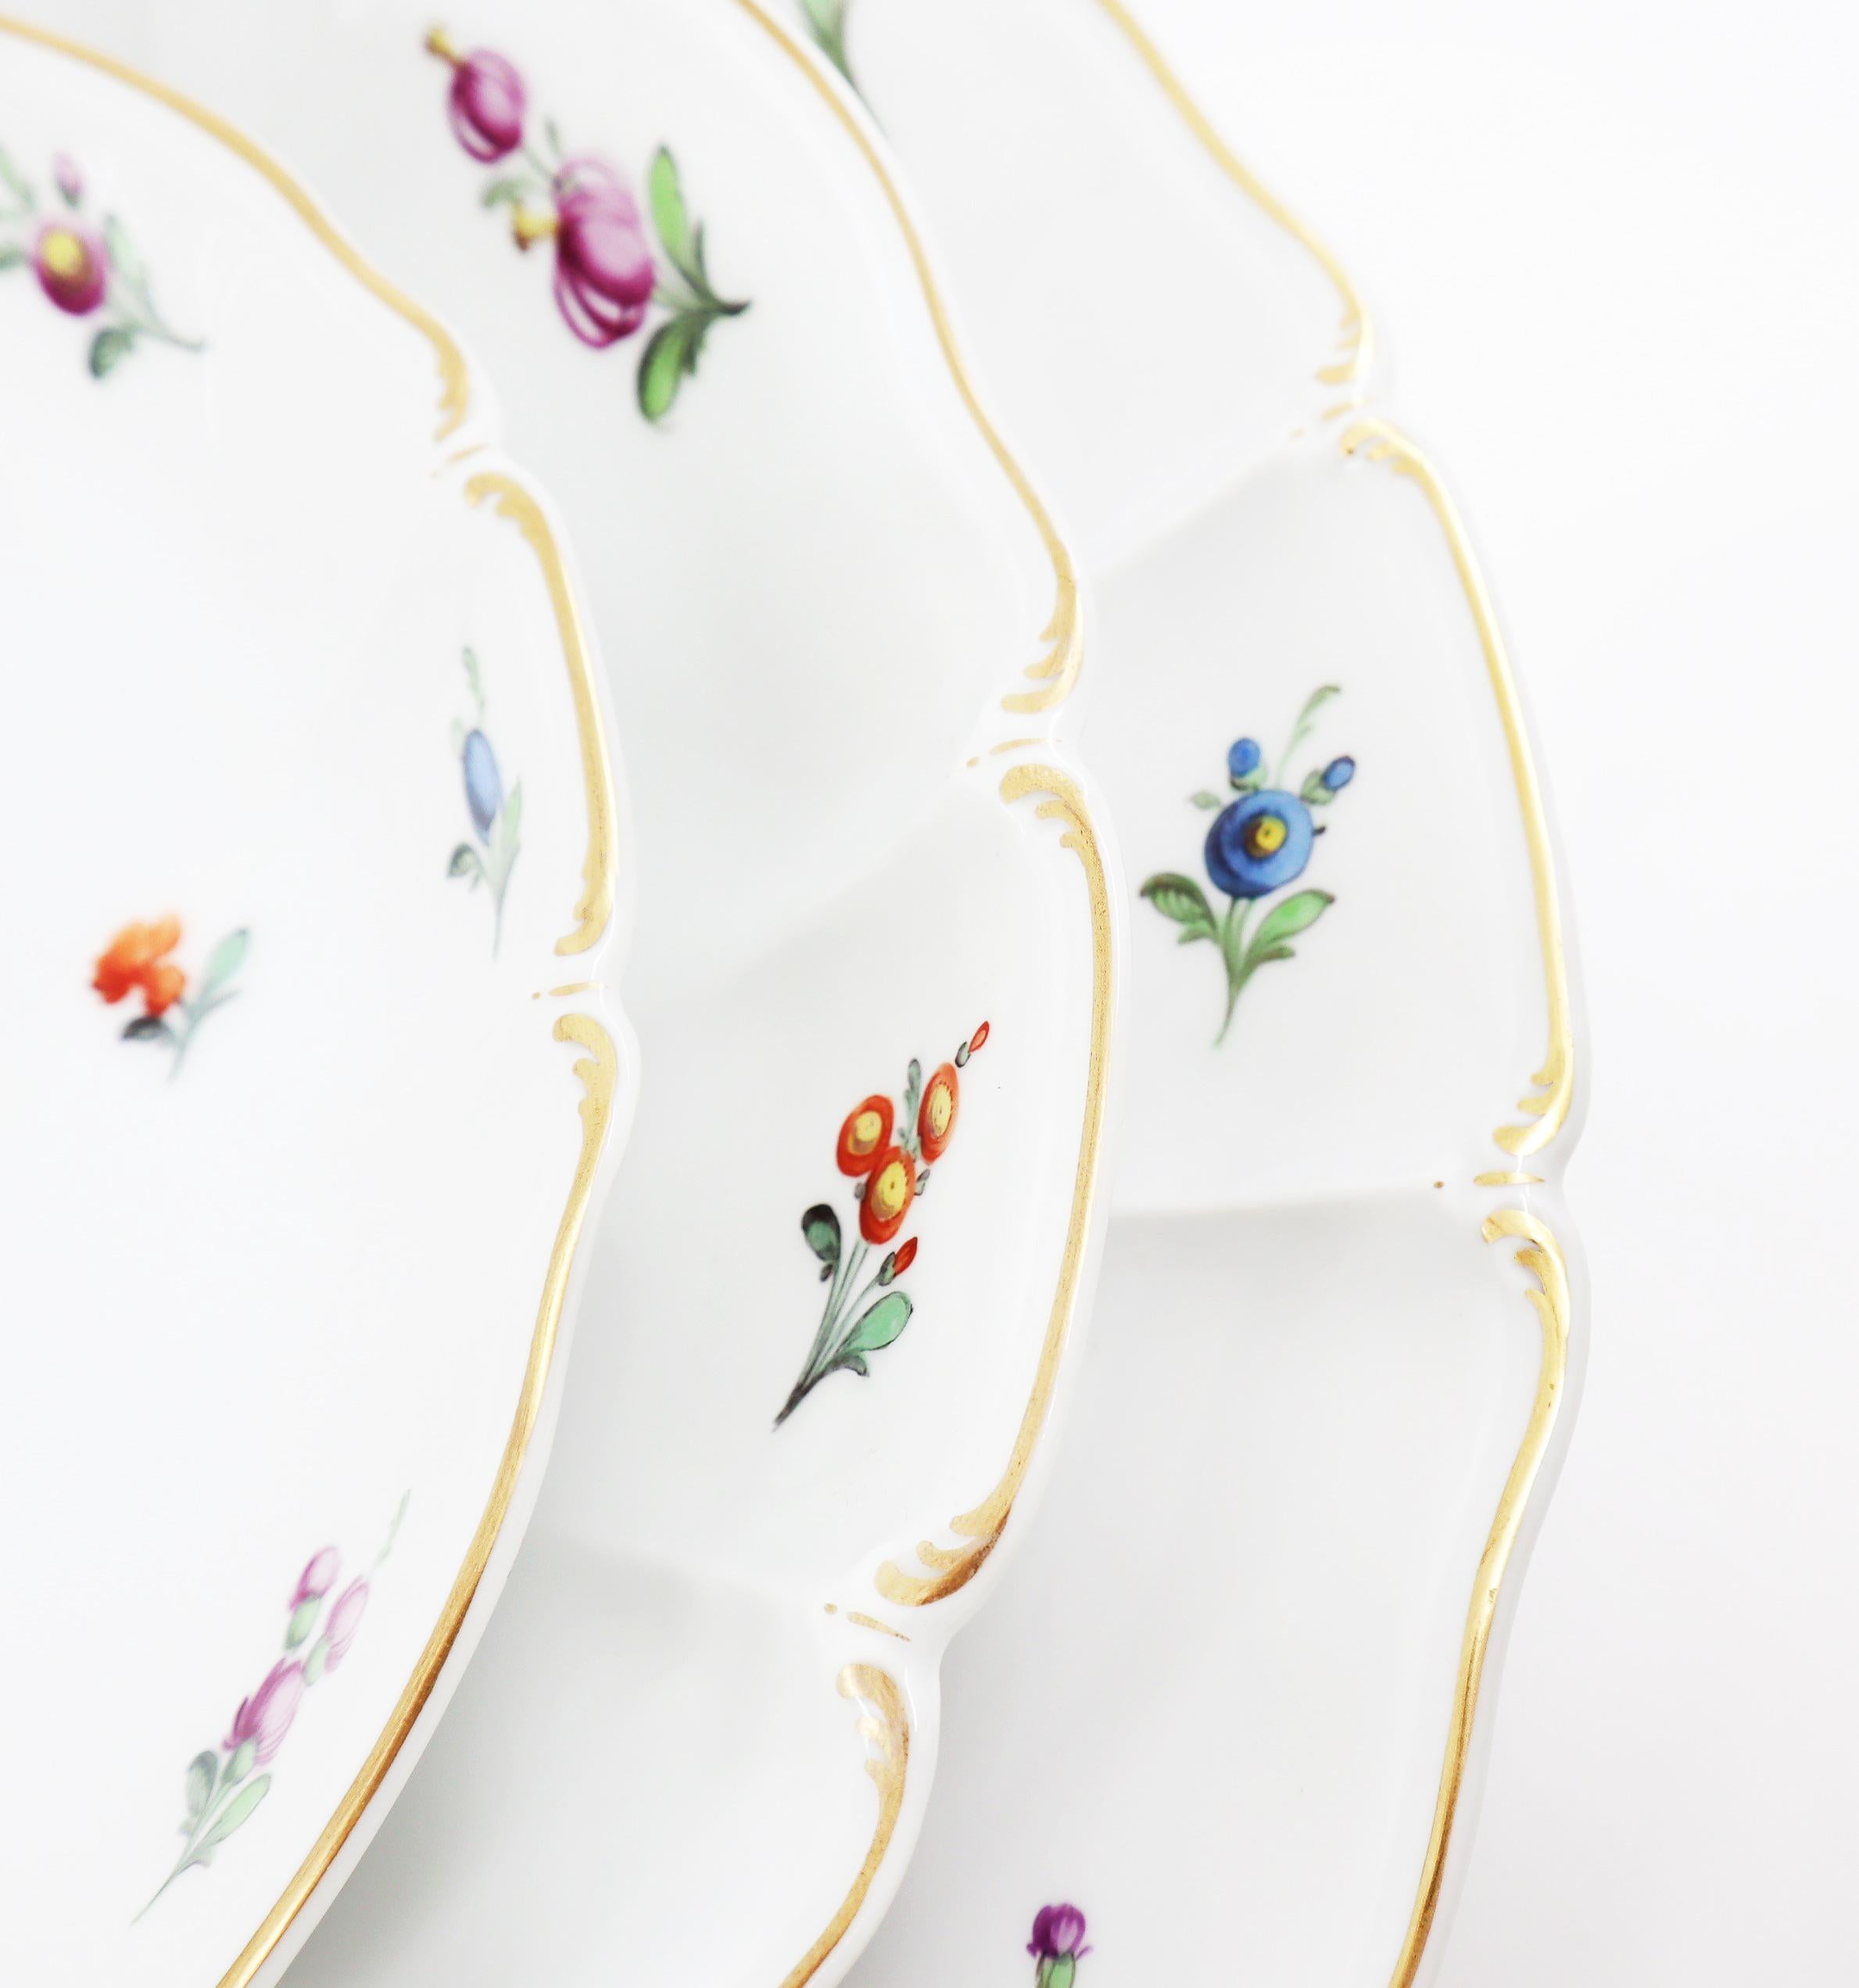 Dinner Service, 19th Century Porcelain, German, Hand Painted with Flowers Décor 2